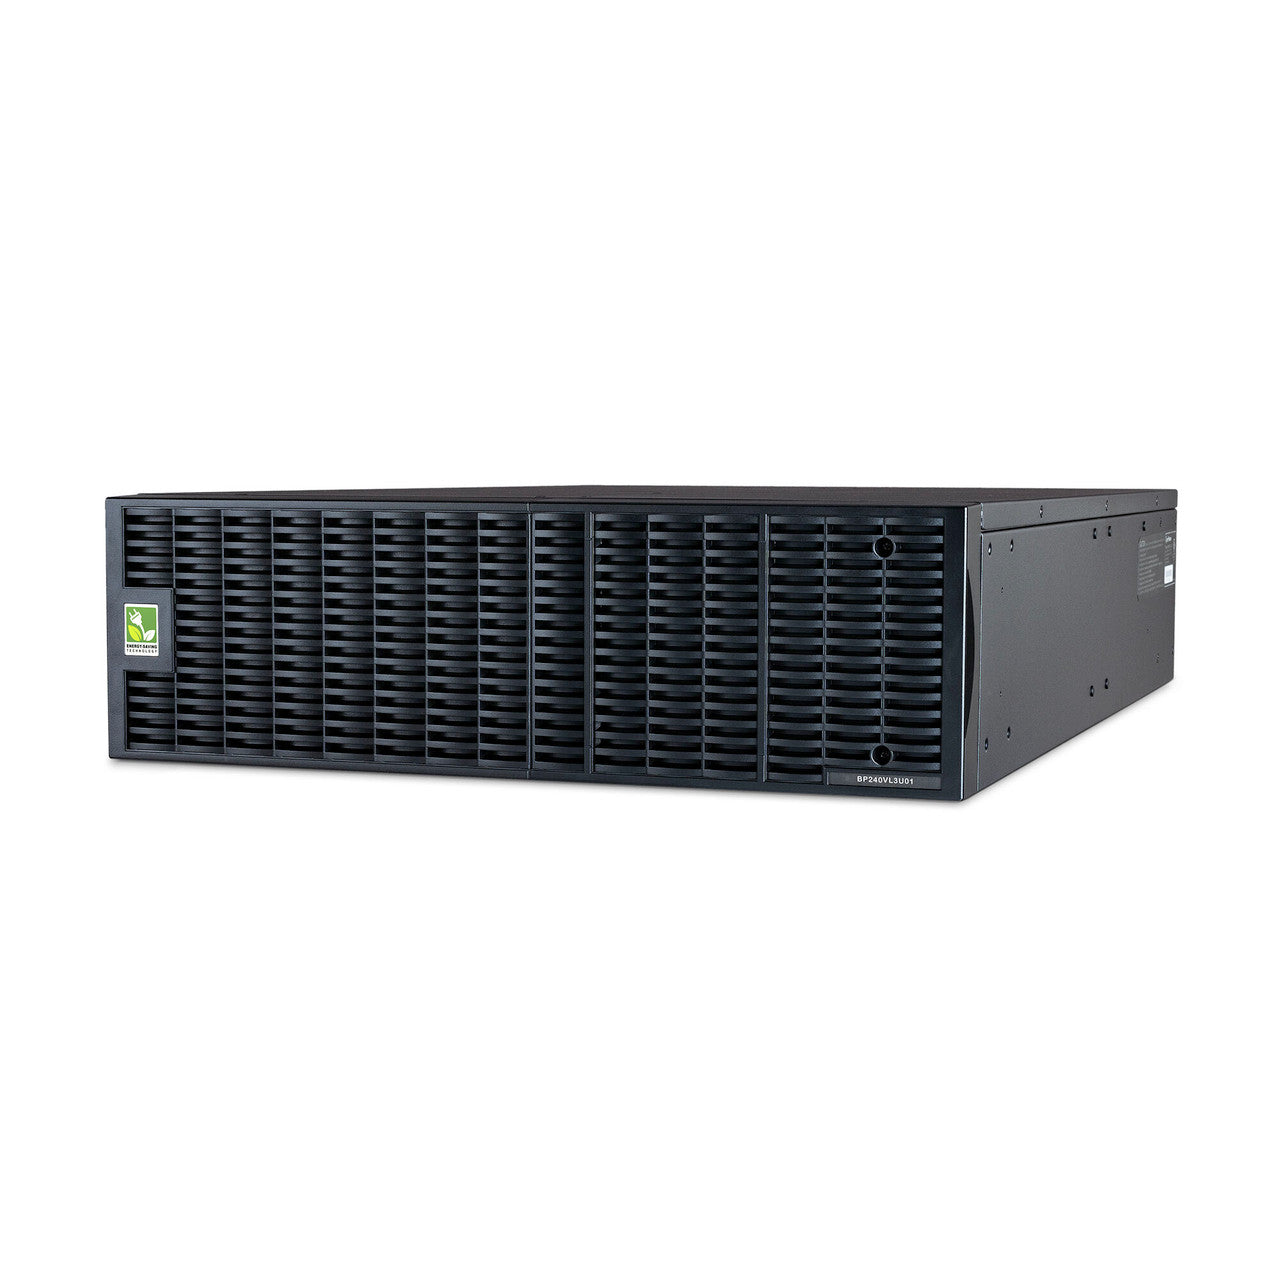 CyberPower BP240VL3U01 Extended Battery Module for Smart App Online 6-10KVA UPS Systems